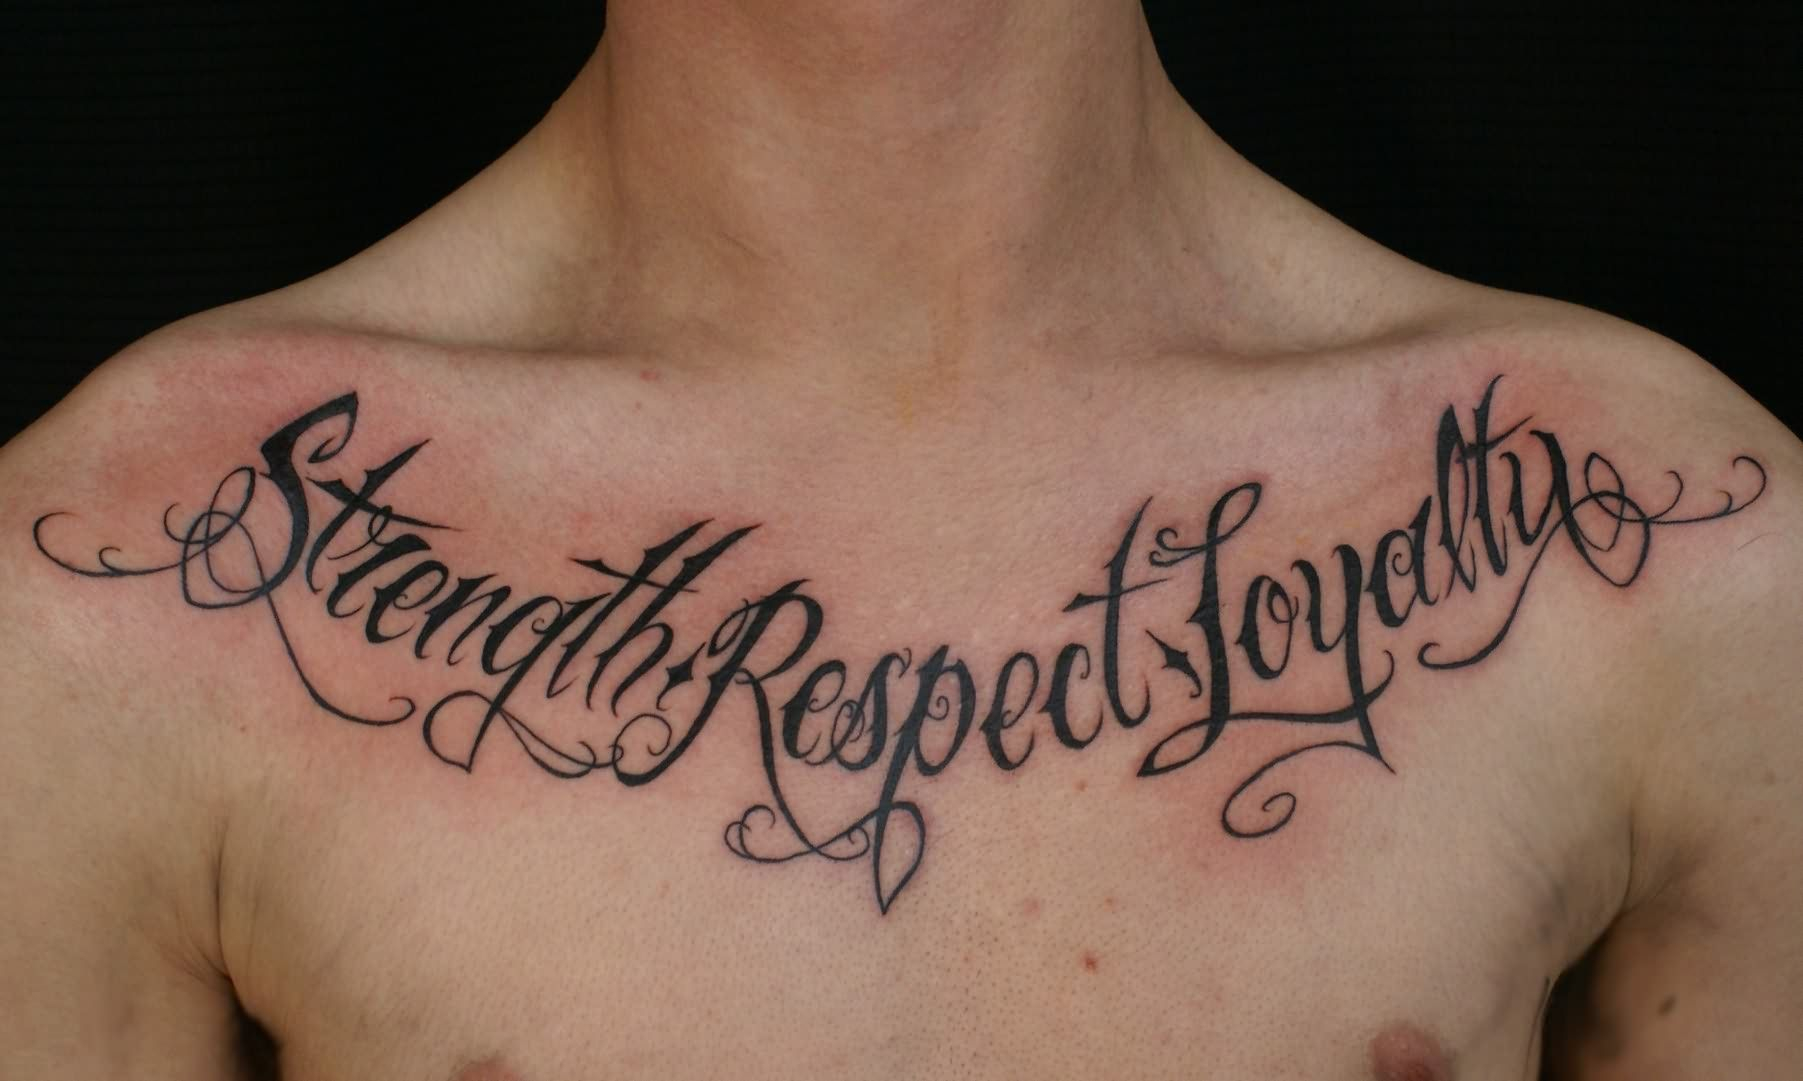 Strength Respect Loyalty Chest Lettering Tattoo Tattoos Tatuajes for sizing 1803 X 1081